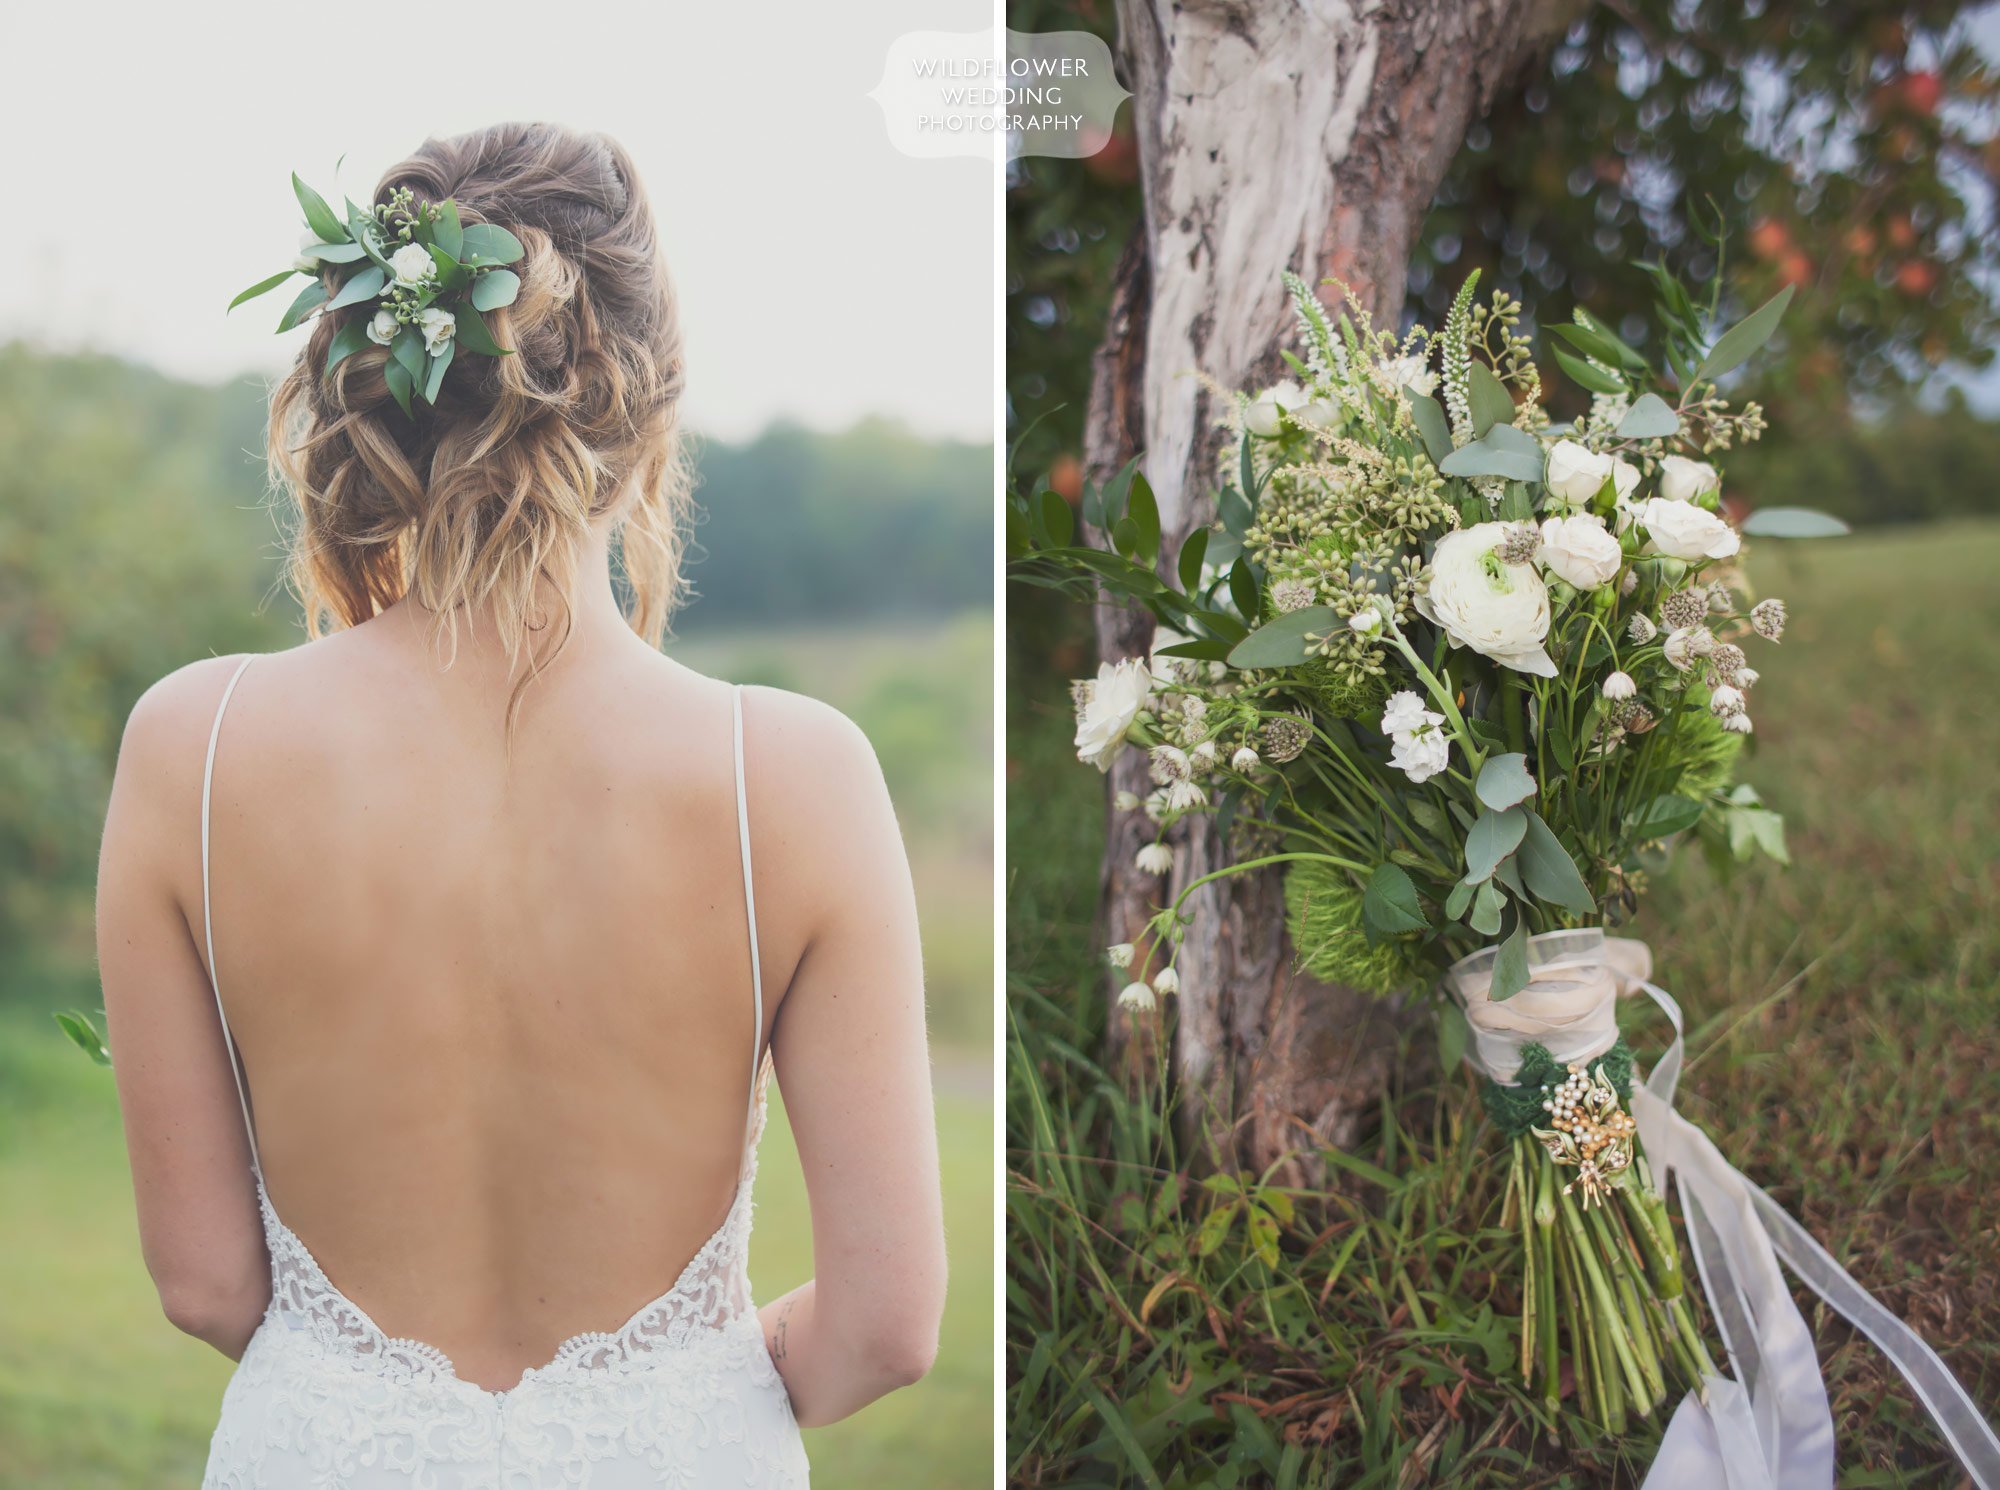 Romantic backless wedding dress with bride and wispy tussled hair at barn wedding in Weston, MO.